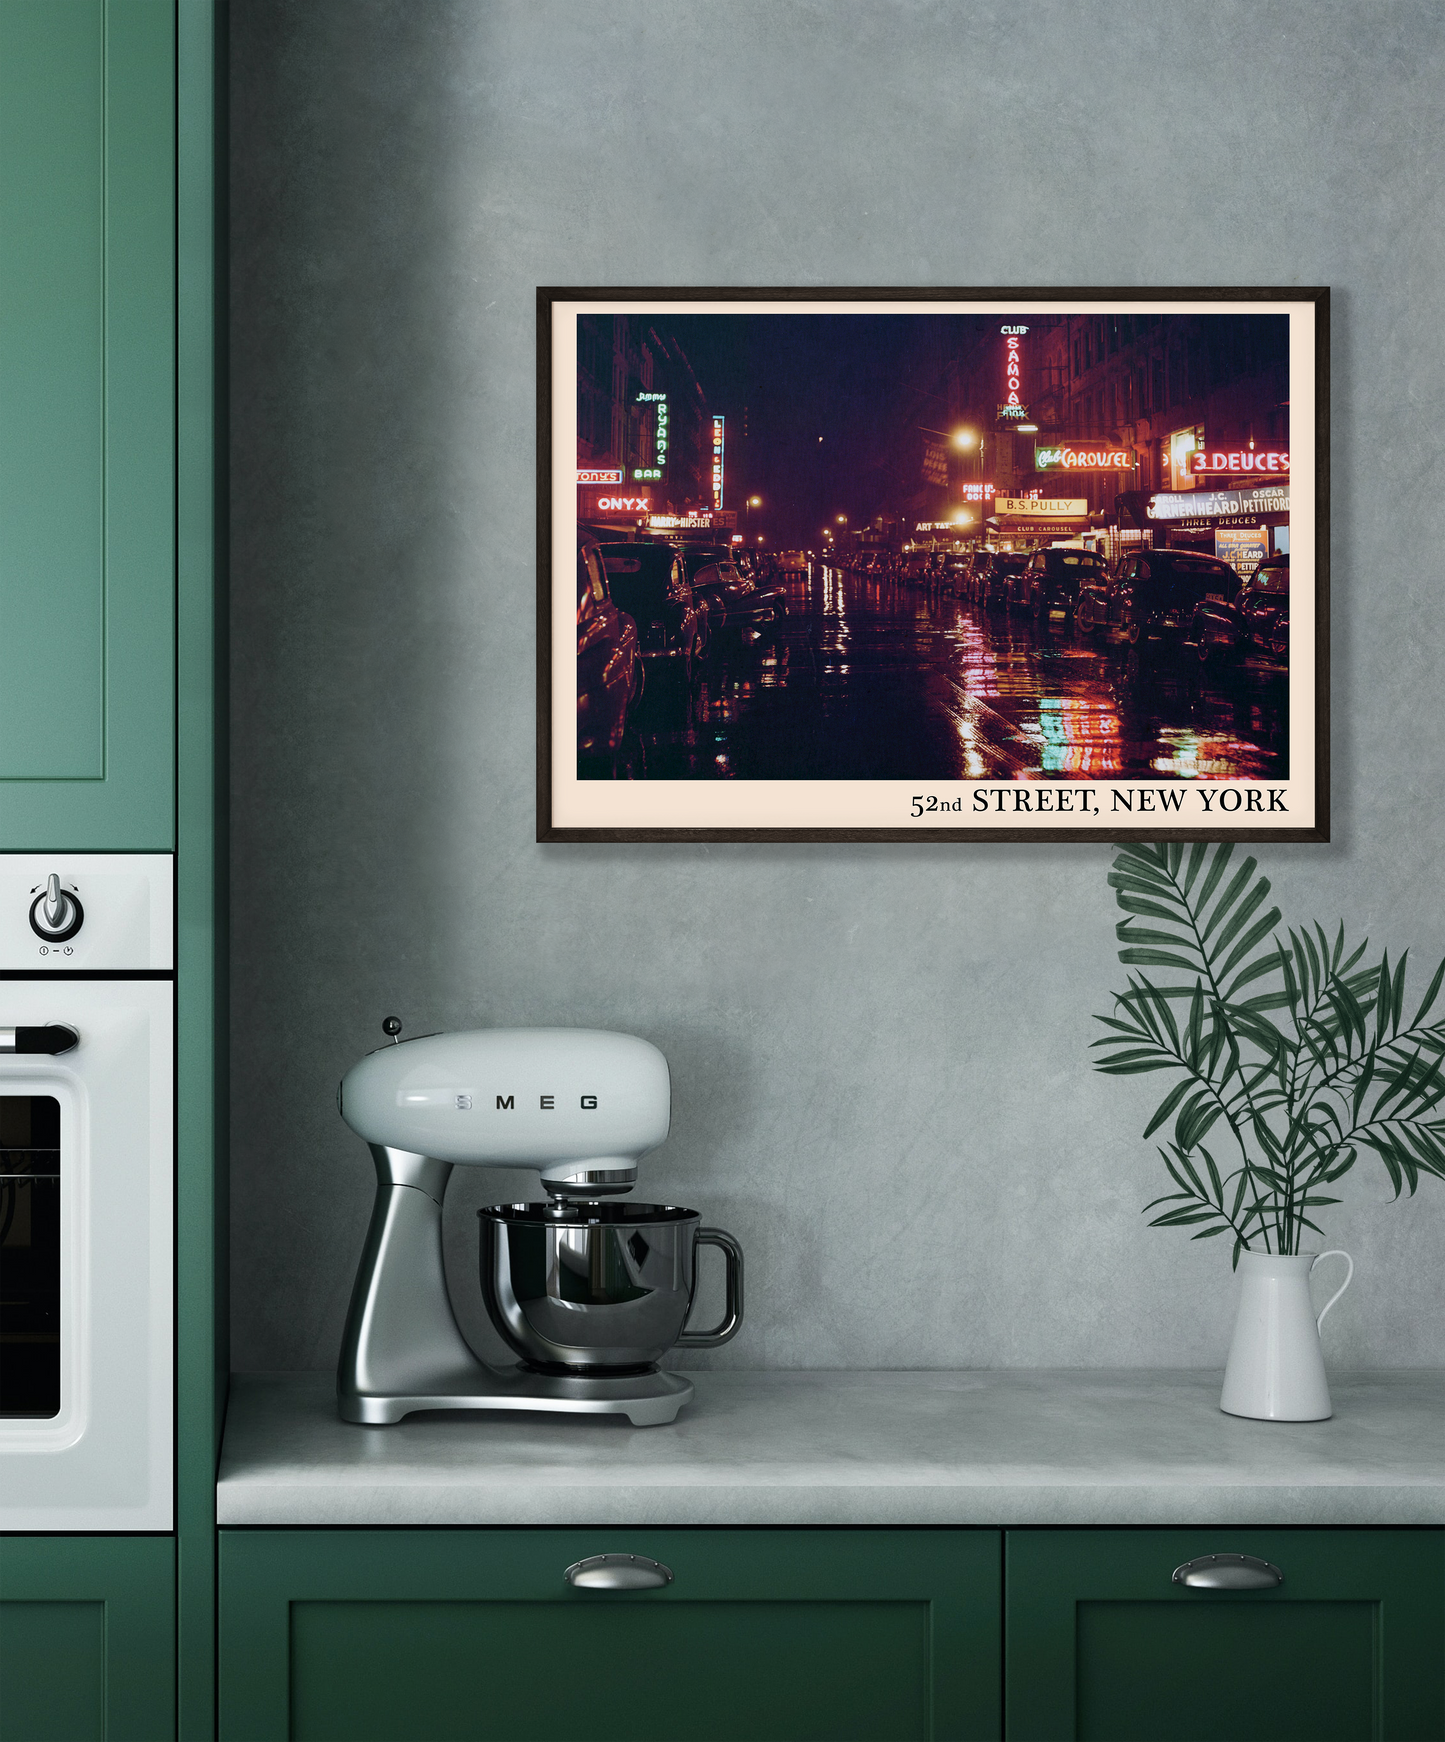 Iconic 52nd Street in New York captured in a retro black framed jazz venue print, hanging on a grey kitchen wall